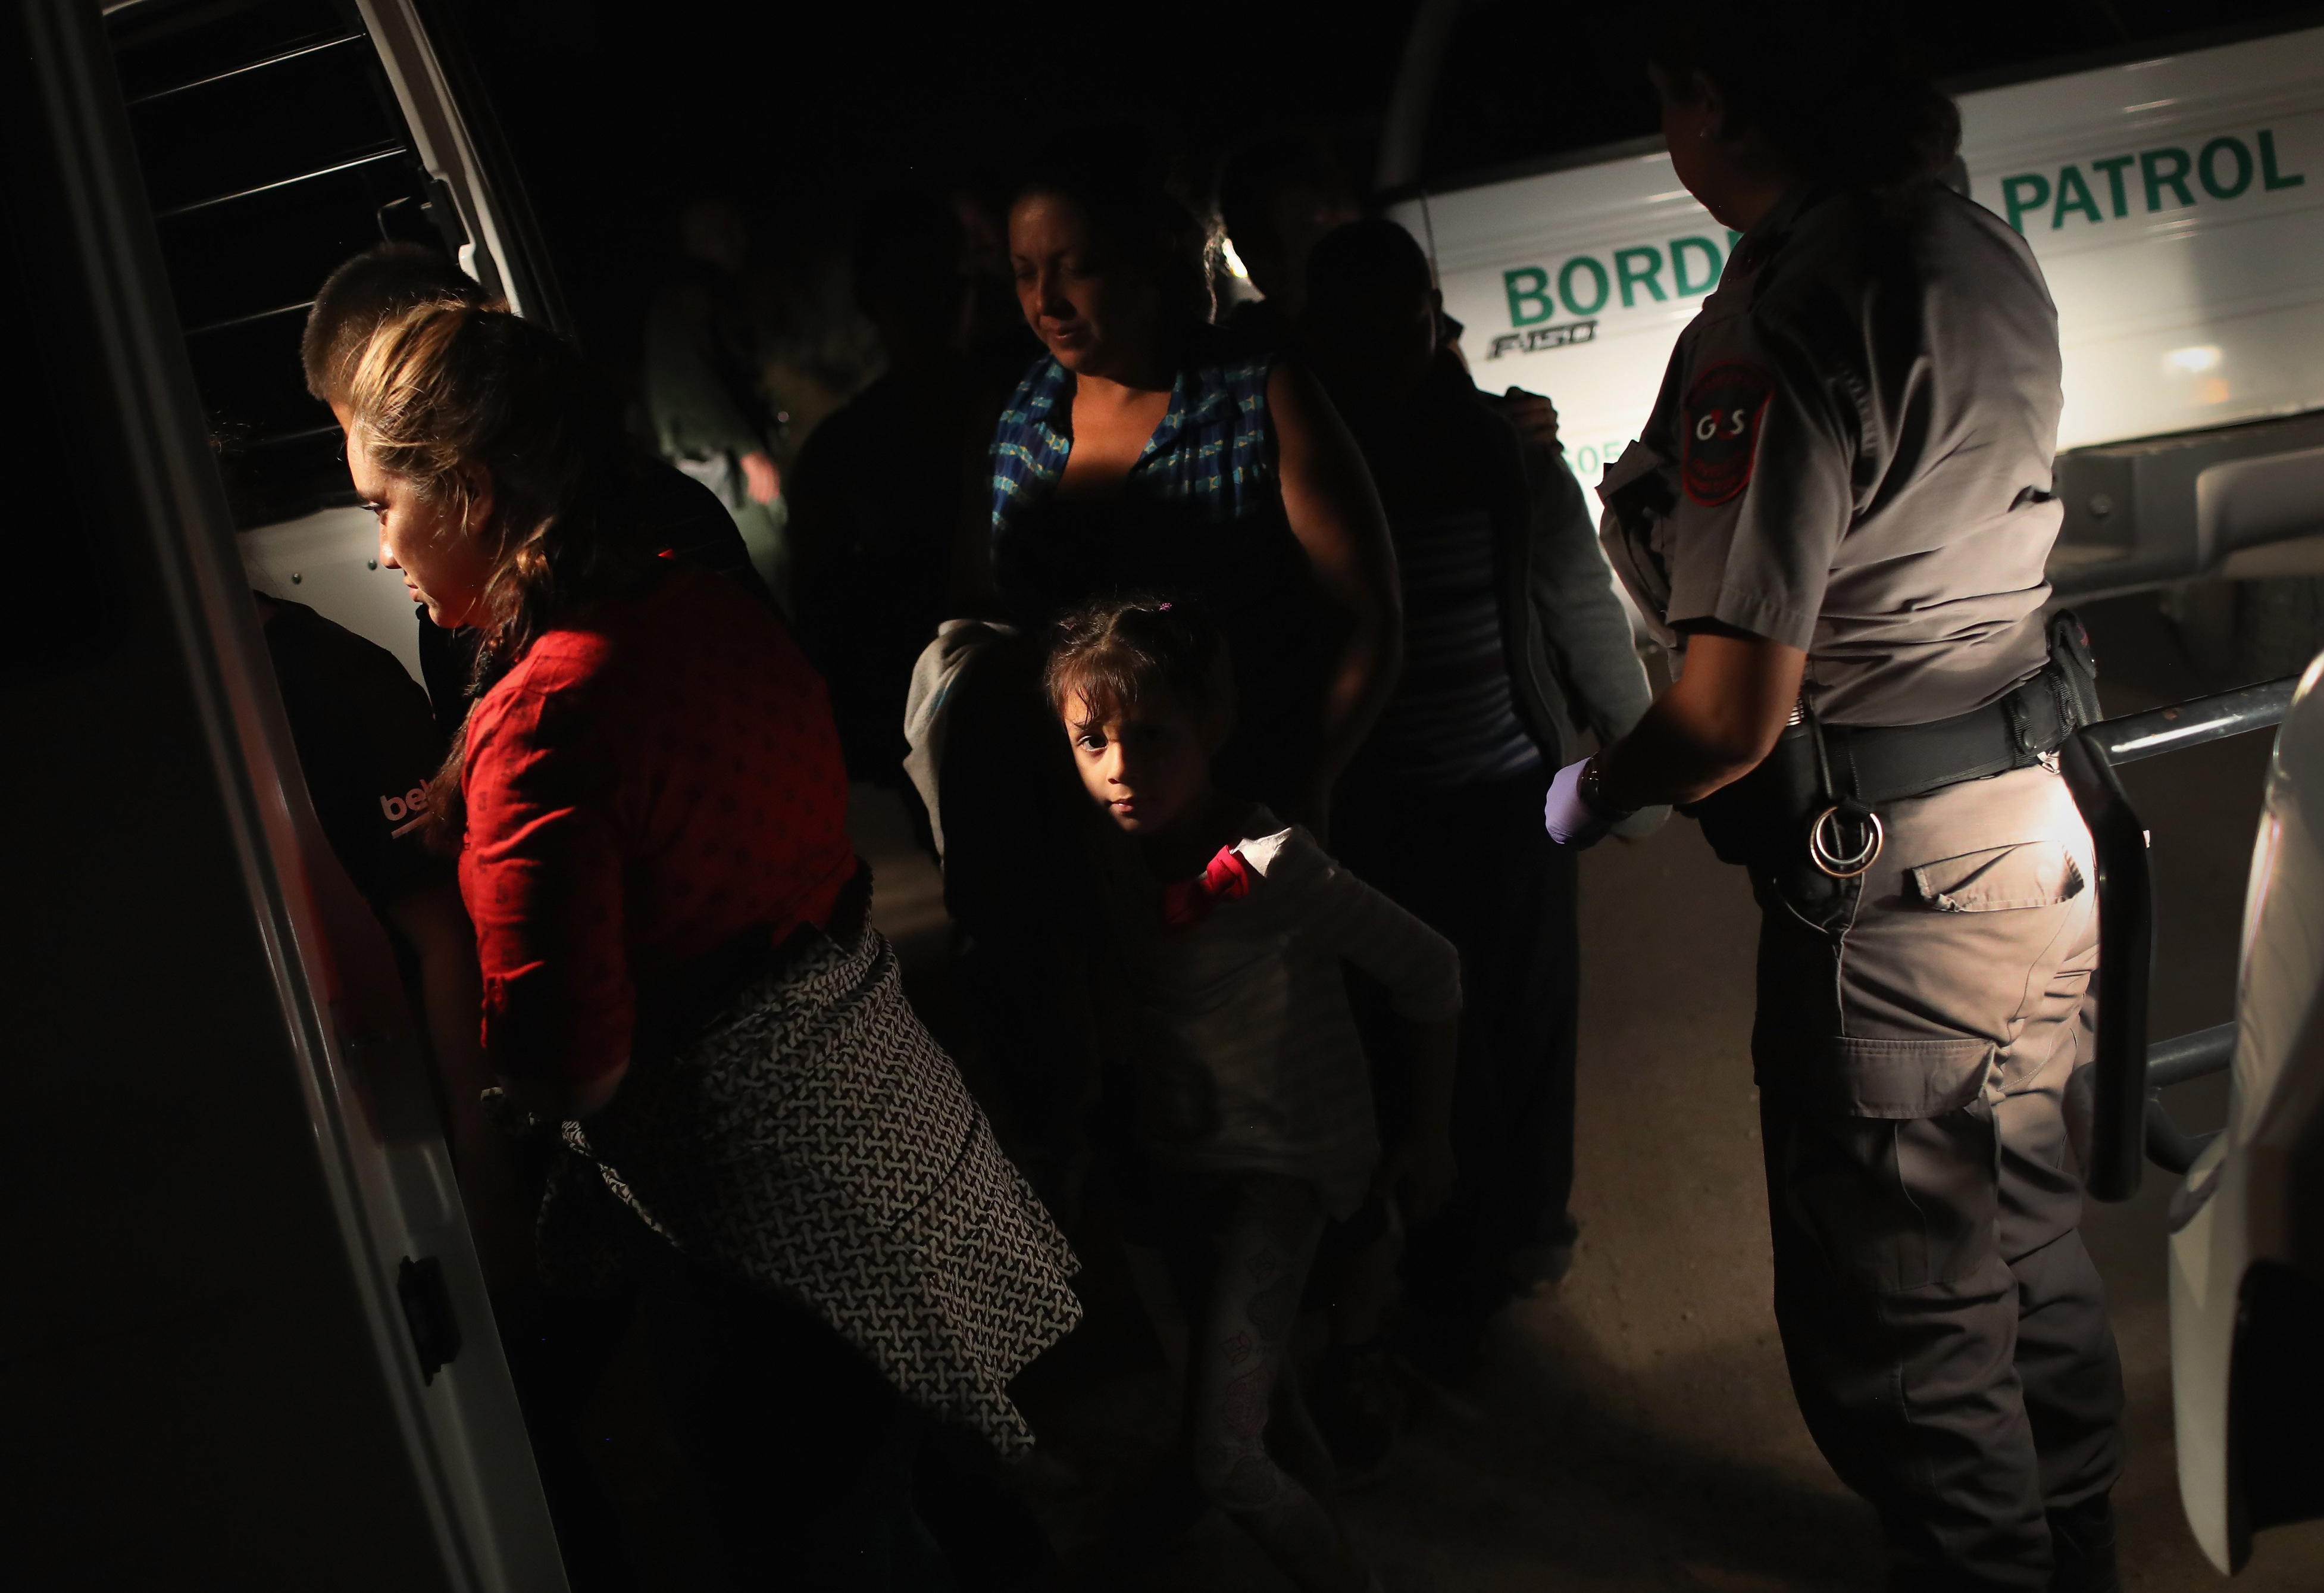 U.S. Border Patrol agents detain a group of Central American asylum seekers near the U.S.-Mexico border in McAllen, Texas on June 12, 2018. (John Moore—Getty Images)